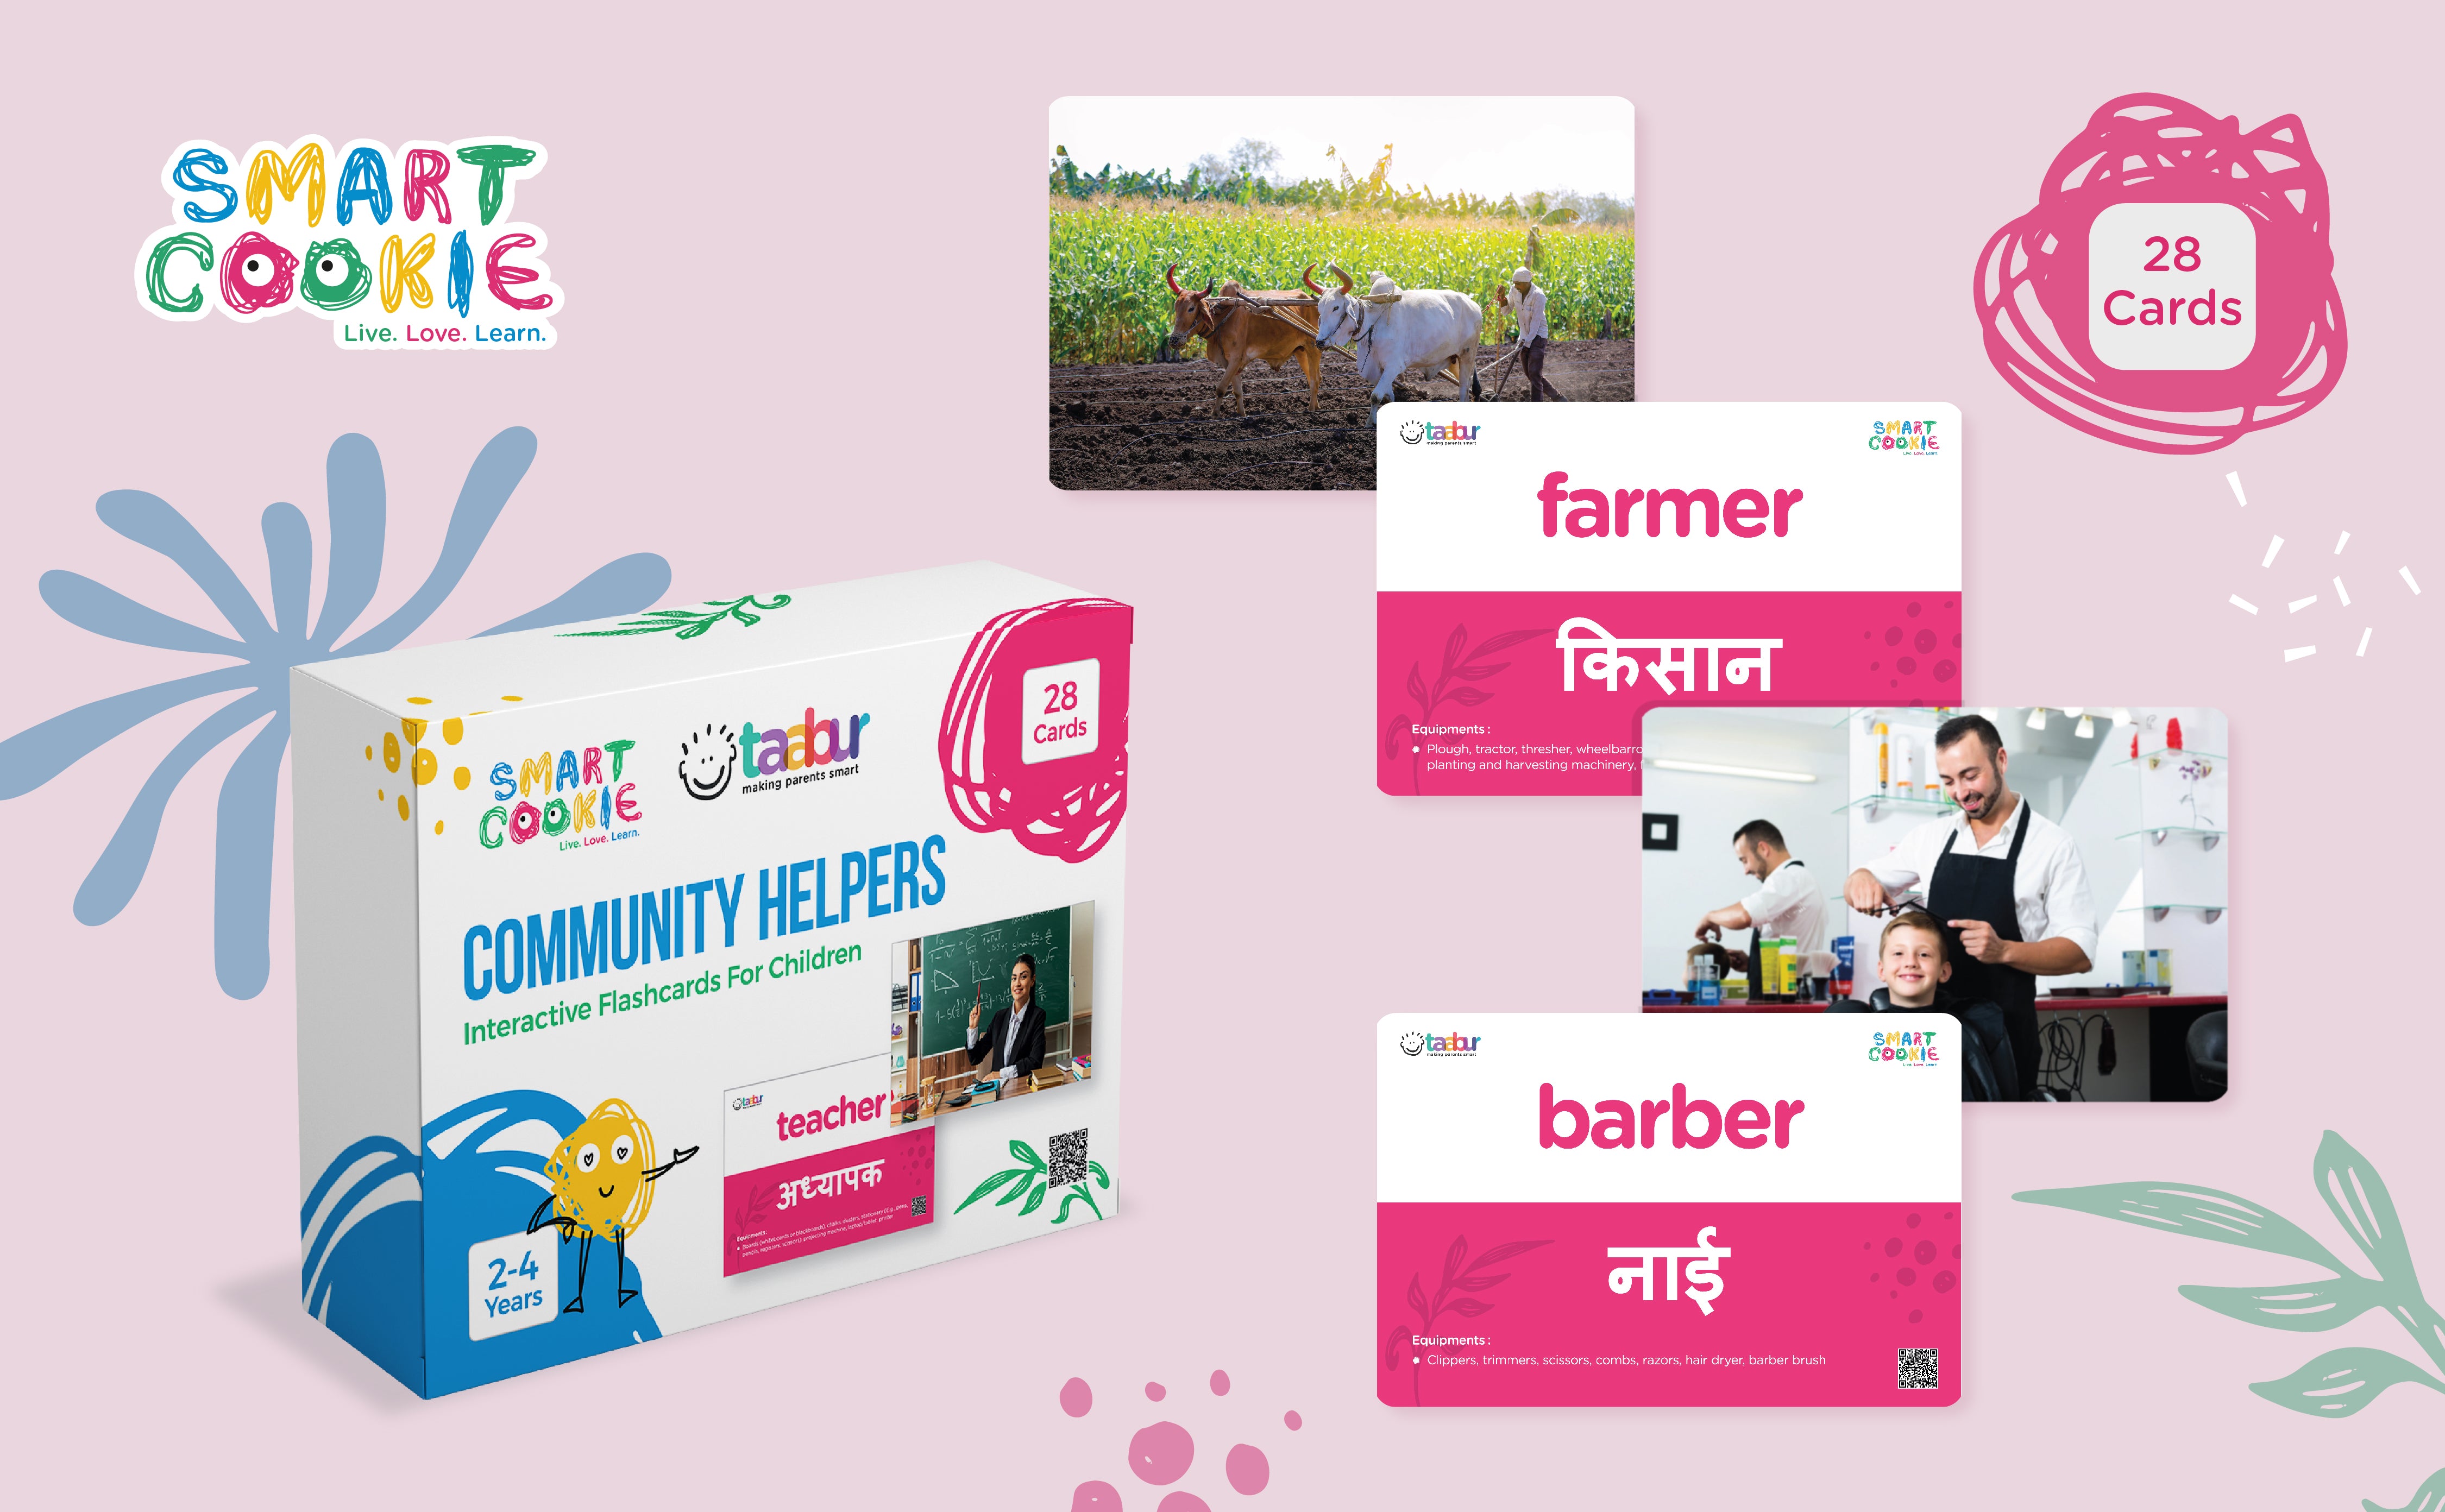 Community Helpers - Interactive Flash Cards for Children (28 Cards) - for Kids Aged 2 to 4 Years Old